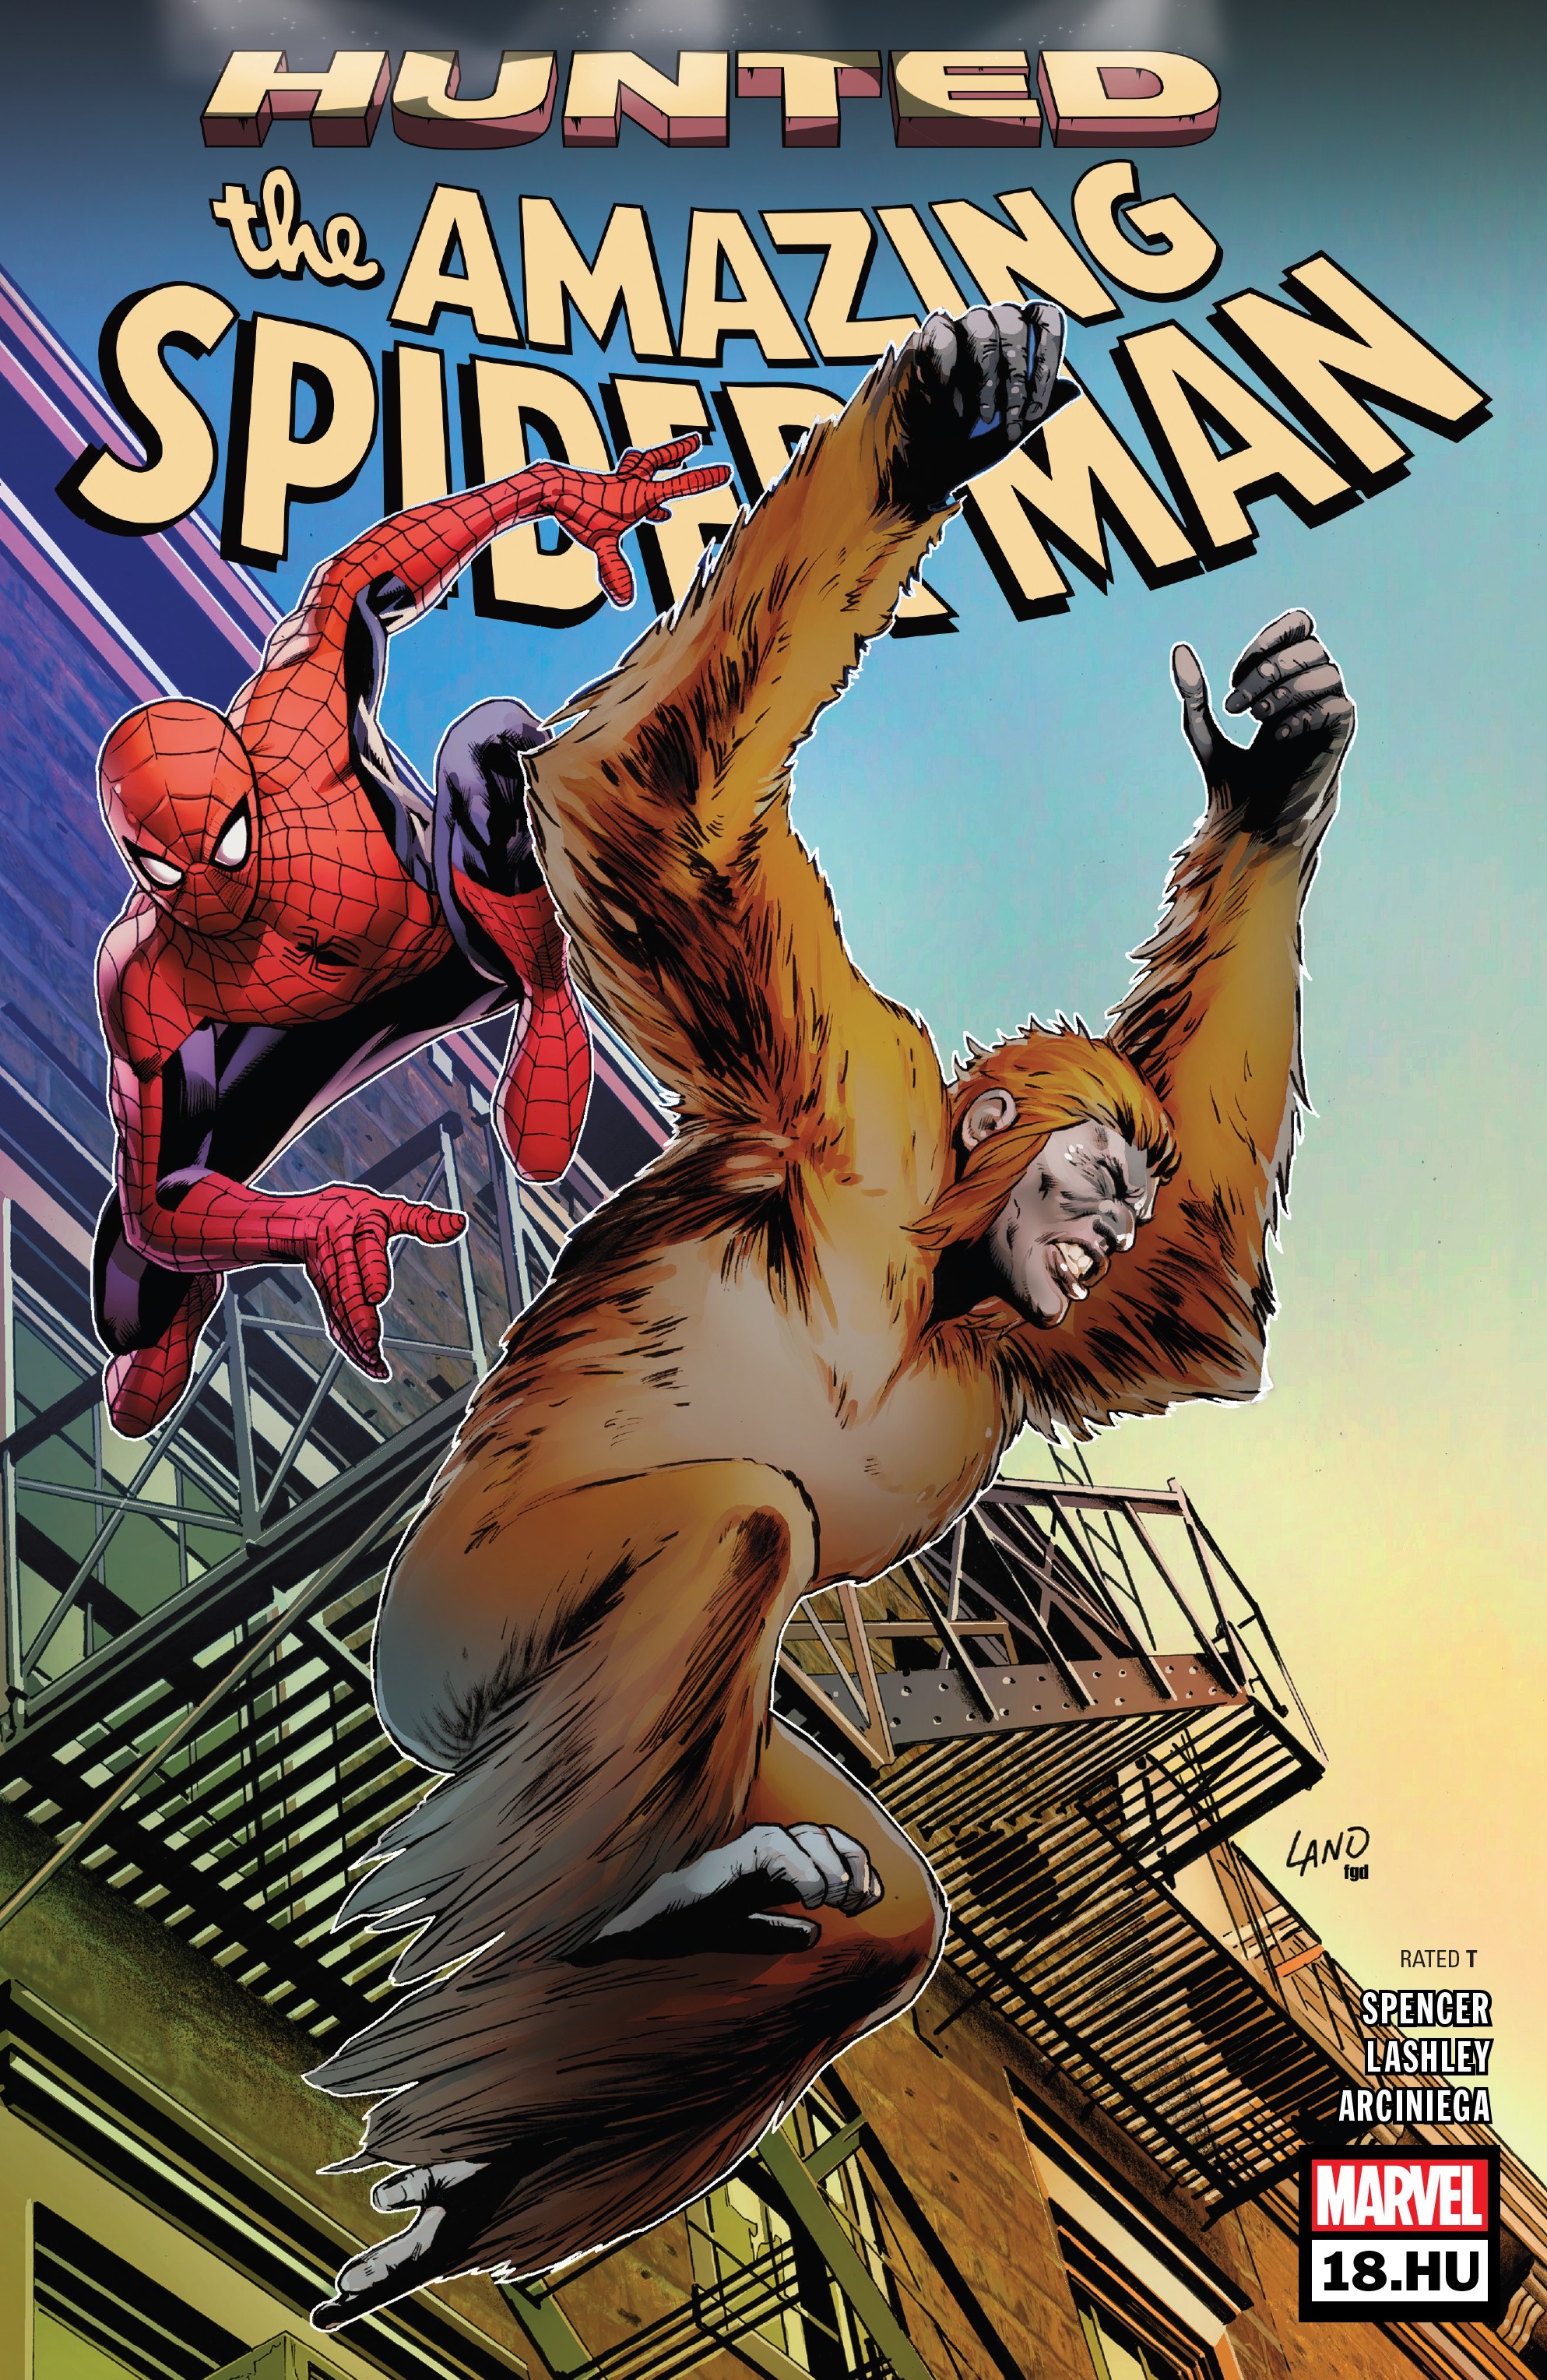 Amazing Spider-Man (2018-): Chapter 18.HU - Page 1